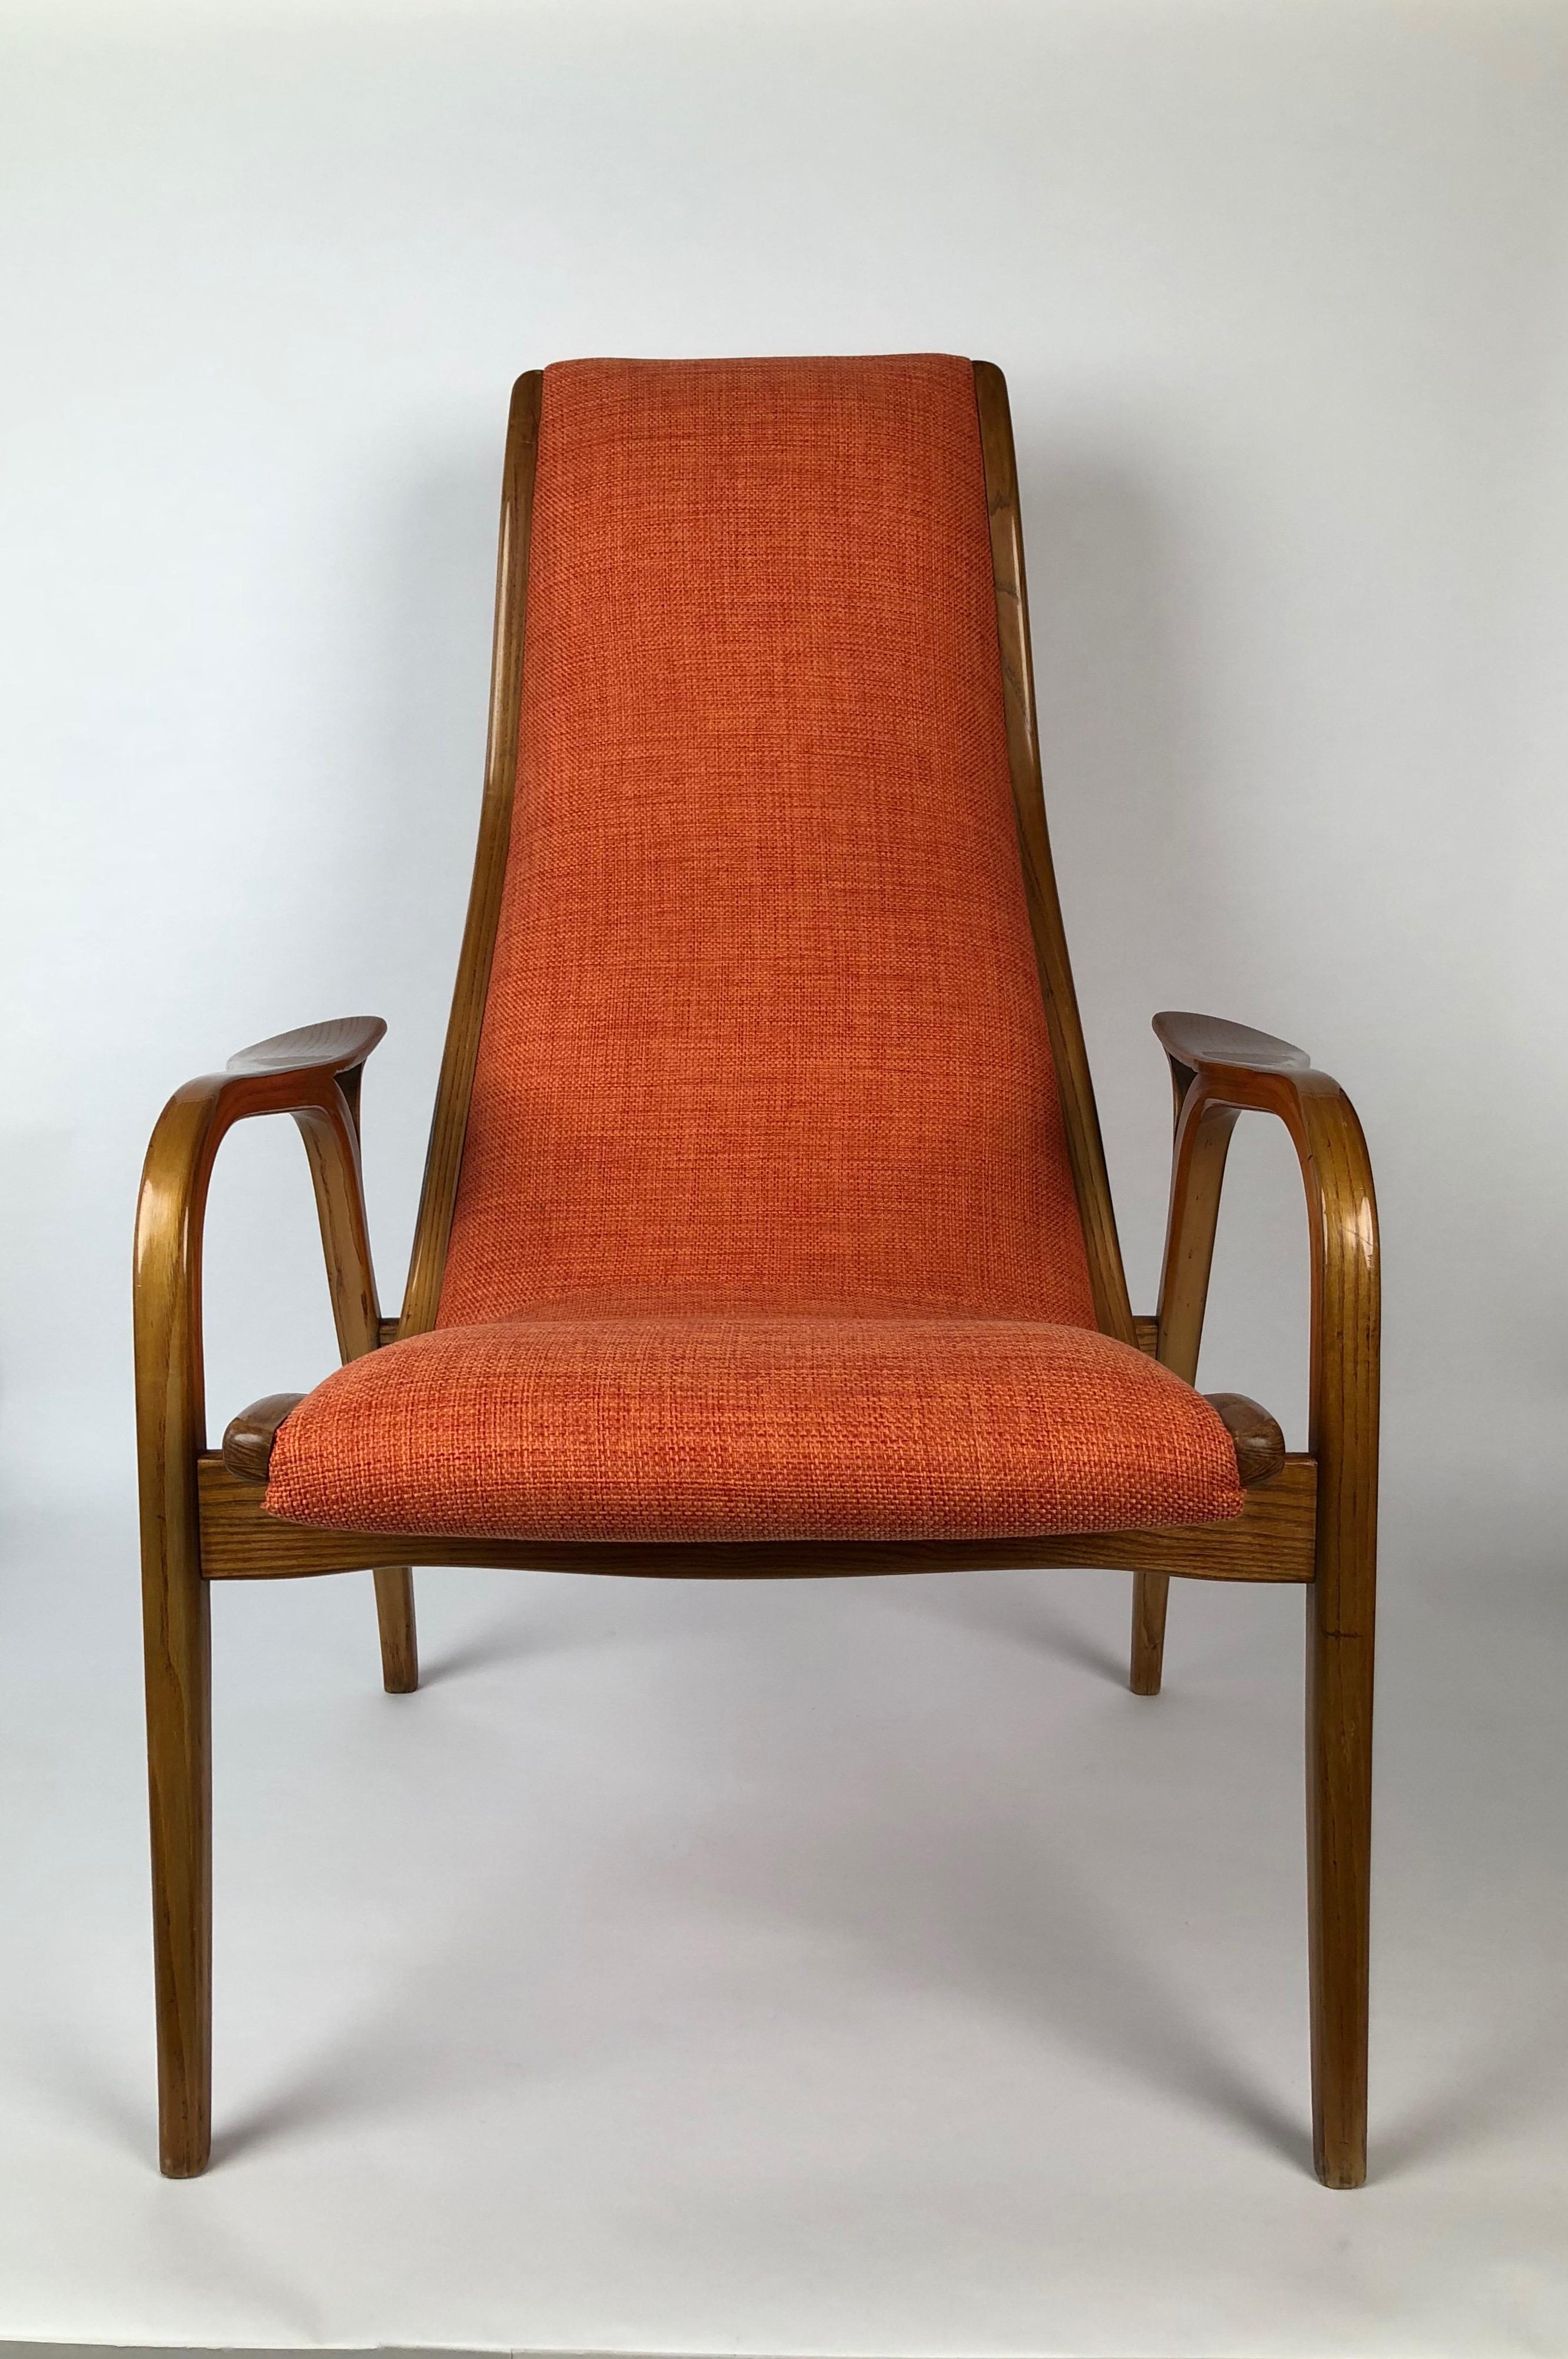 Light weight armchair designed by Yngve Ekström in 1950s, produced by Swedese.
The frame is made in oakwood and has been recovered in orange fabric.
The armchair is un a very good condition.